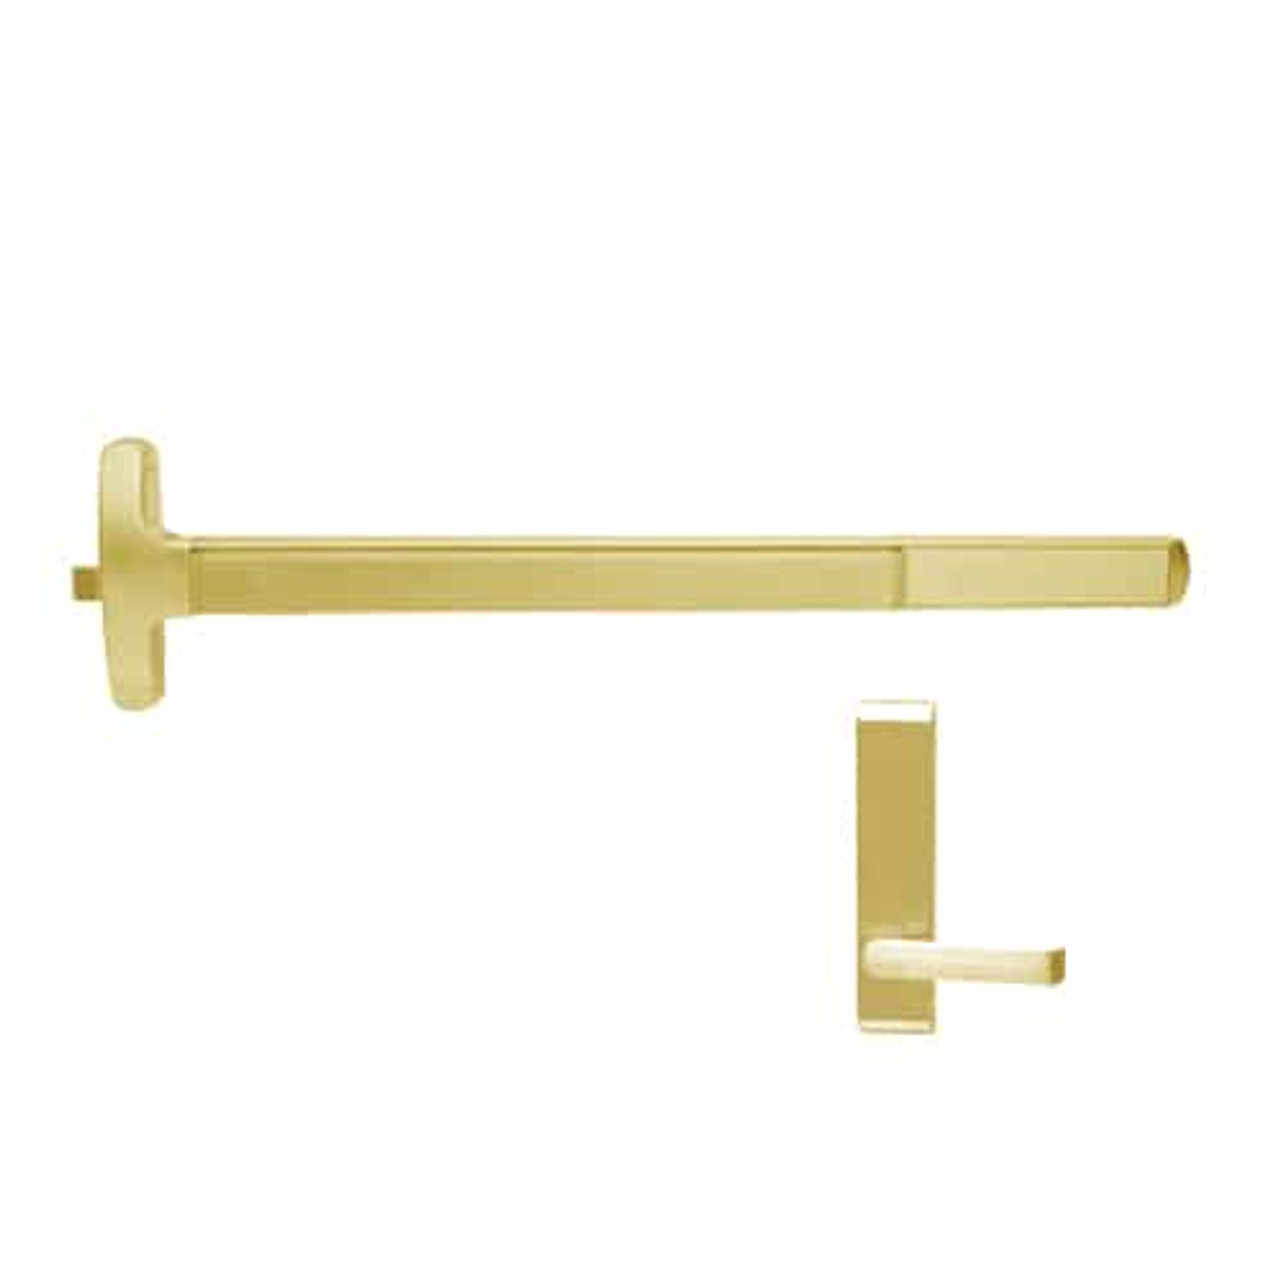 F-24-R-L-BE-DANE-US3-4-RHR Falcon Exit Device in Polished Brass